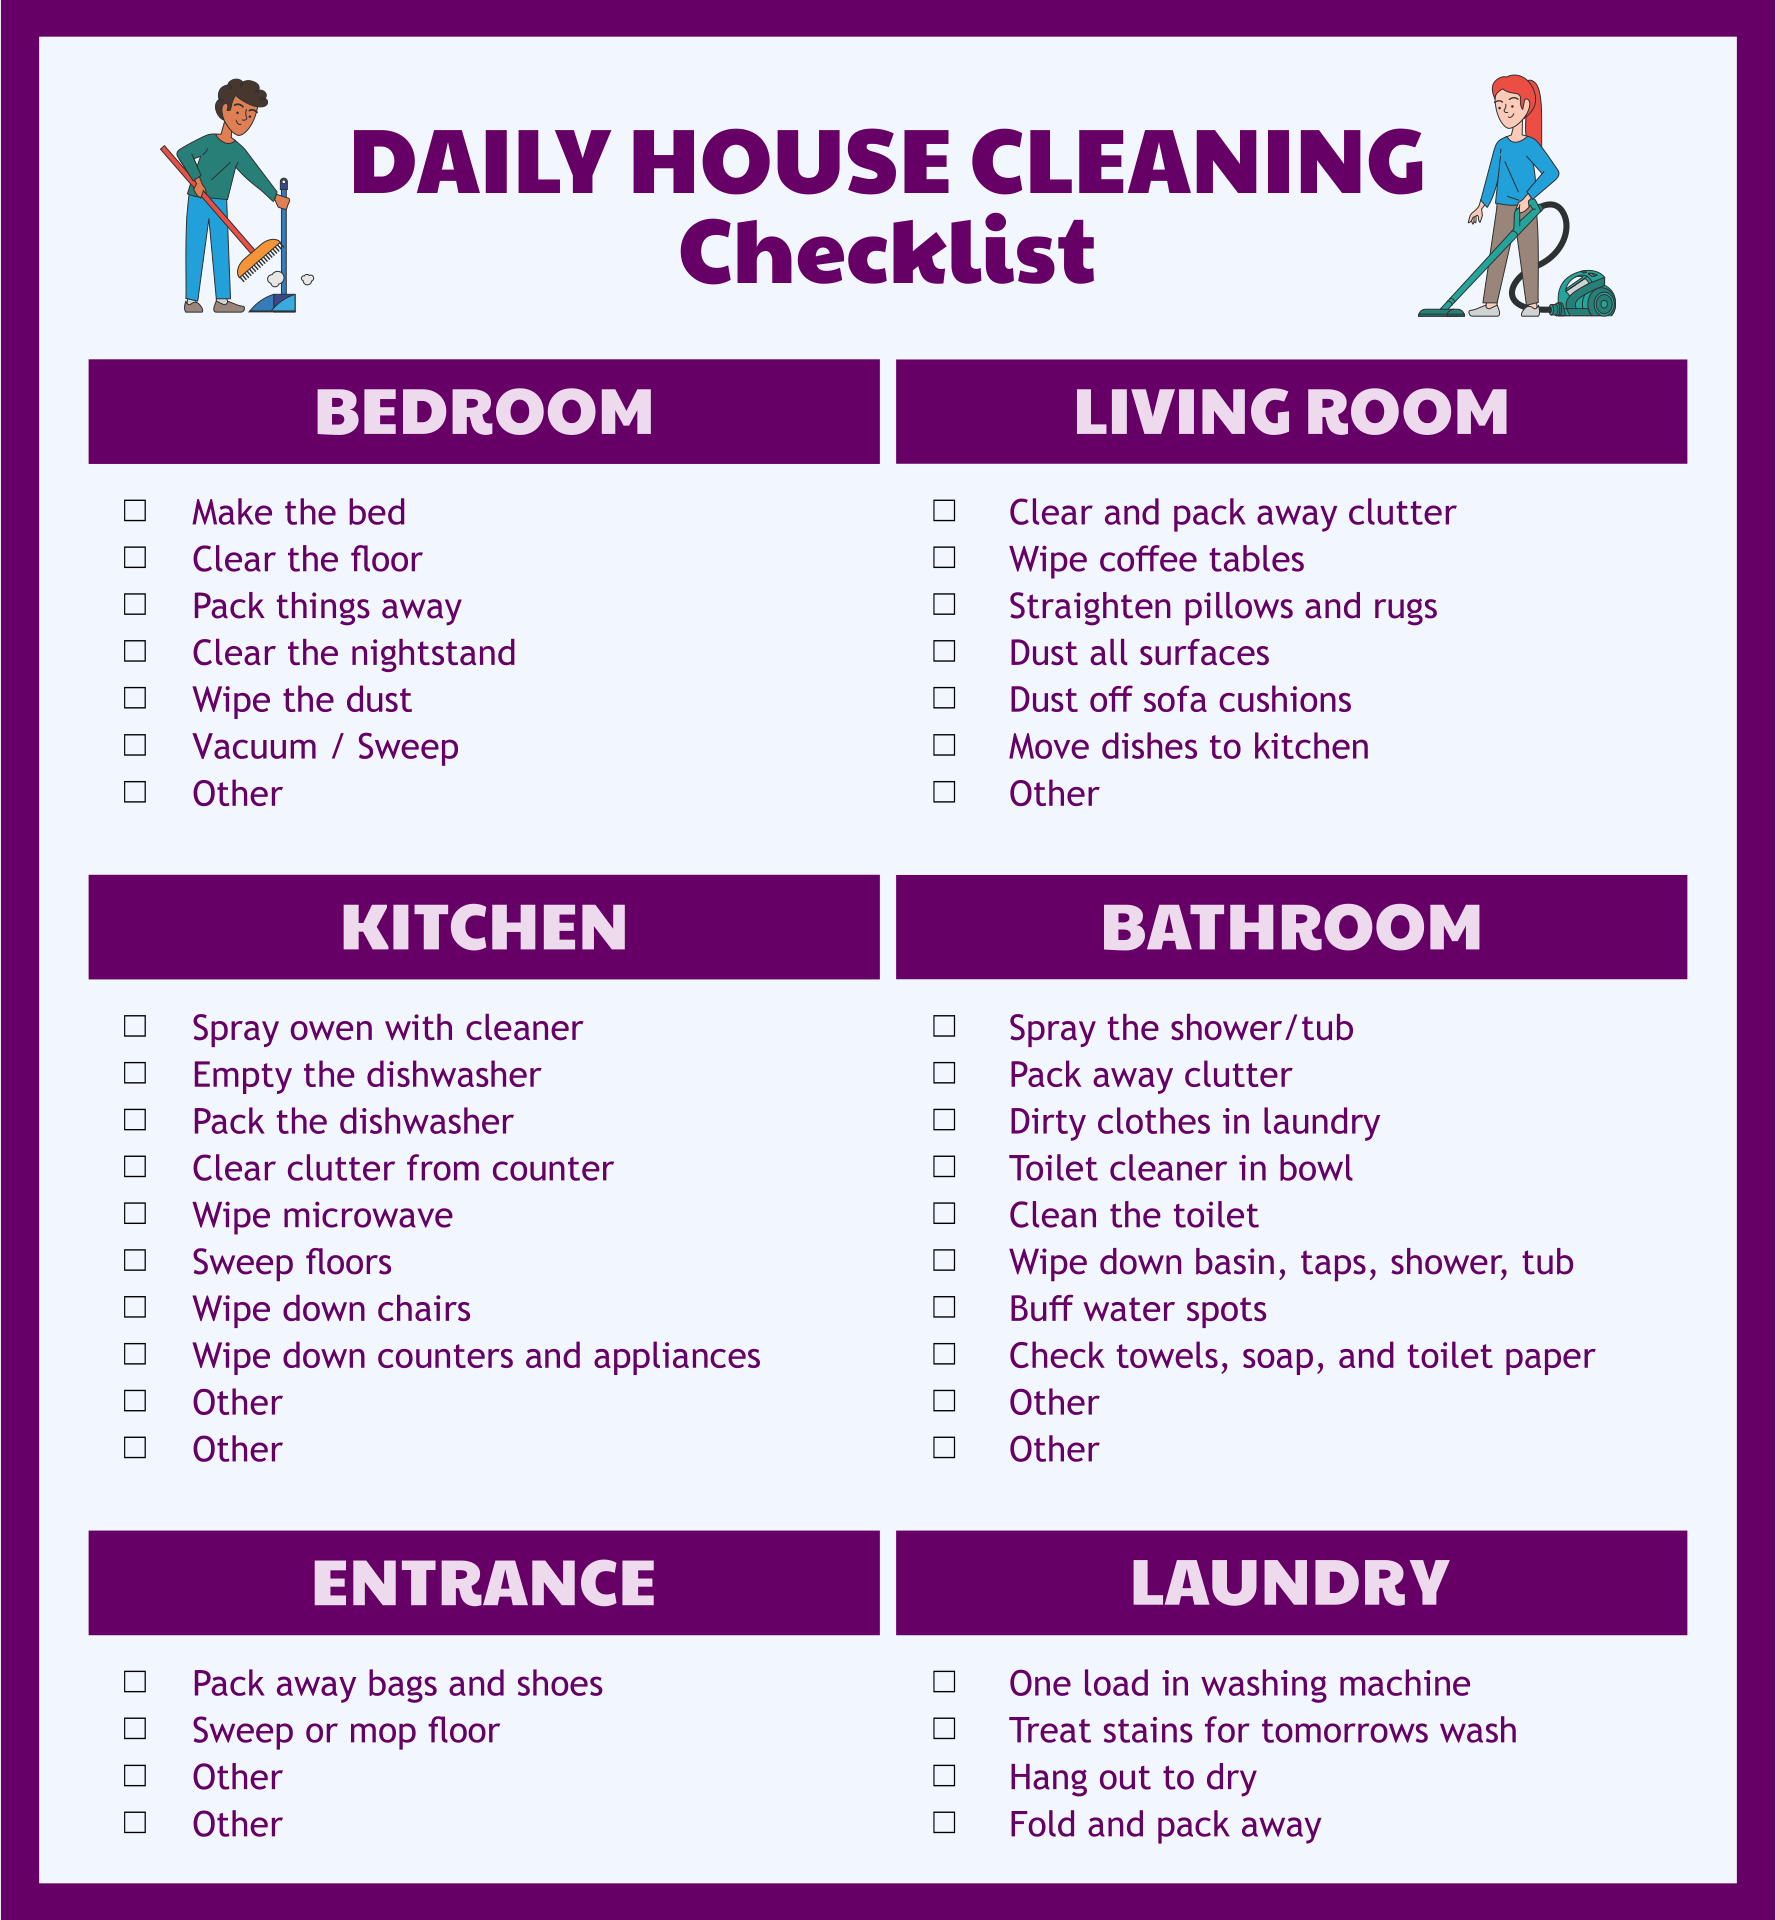 a-free-printable-house-cleaning-checklist-pdf-video-house-images-and-photos-finder